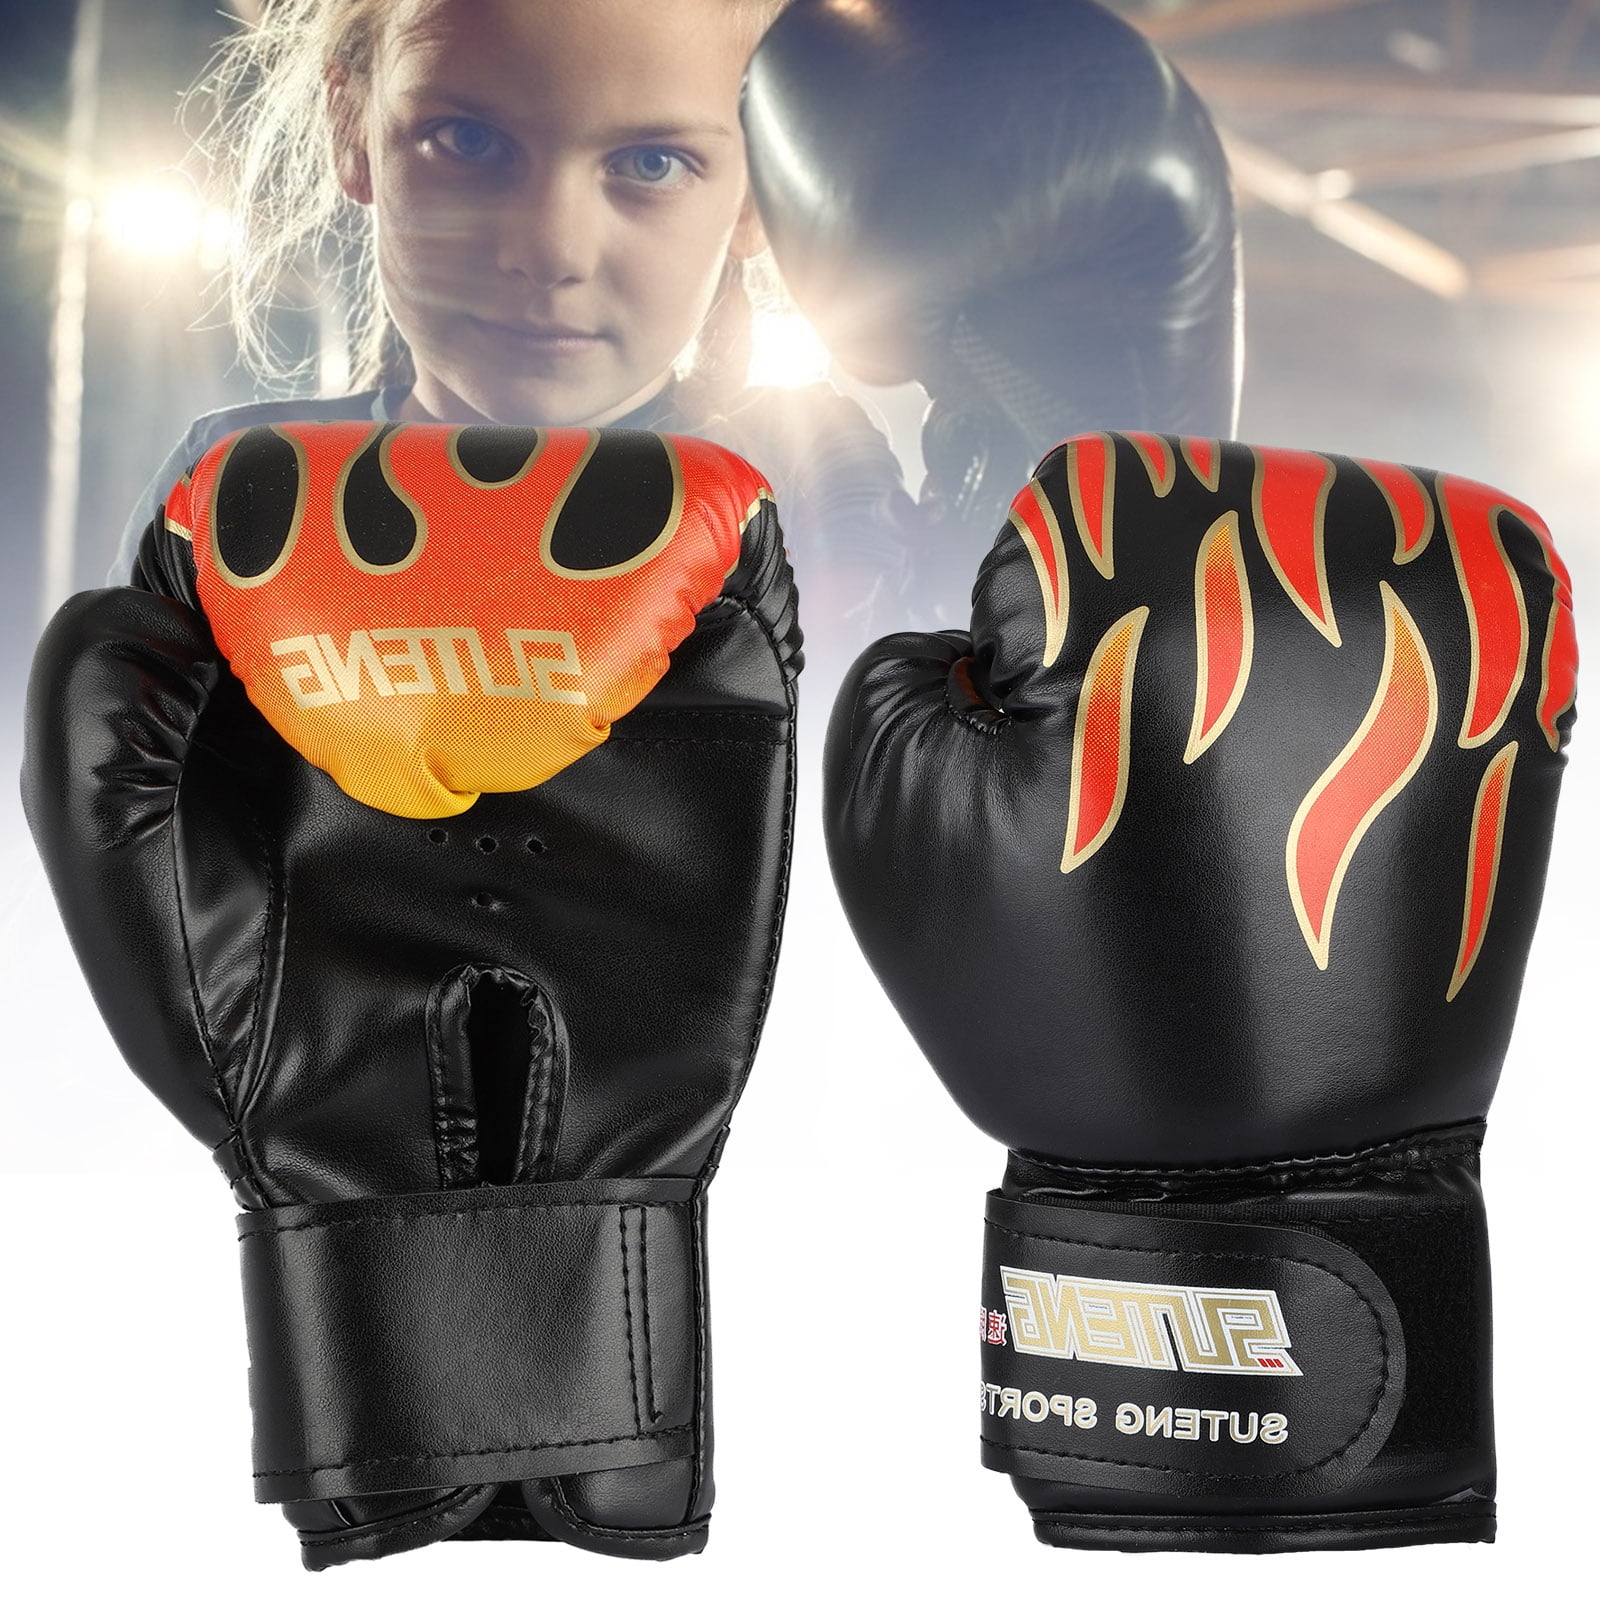 PRO BAG MITTS SPARRING KICK BOXING GLOVES MMA S M L XL 